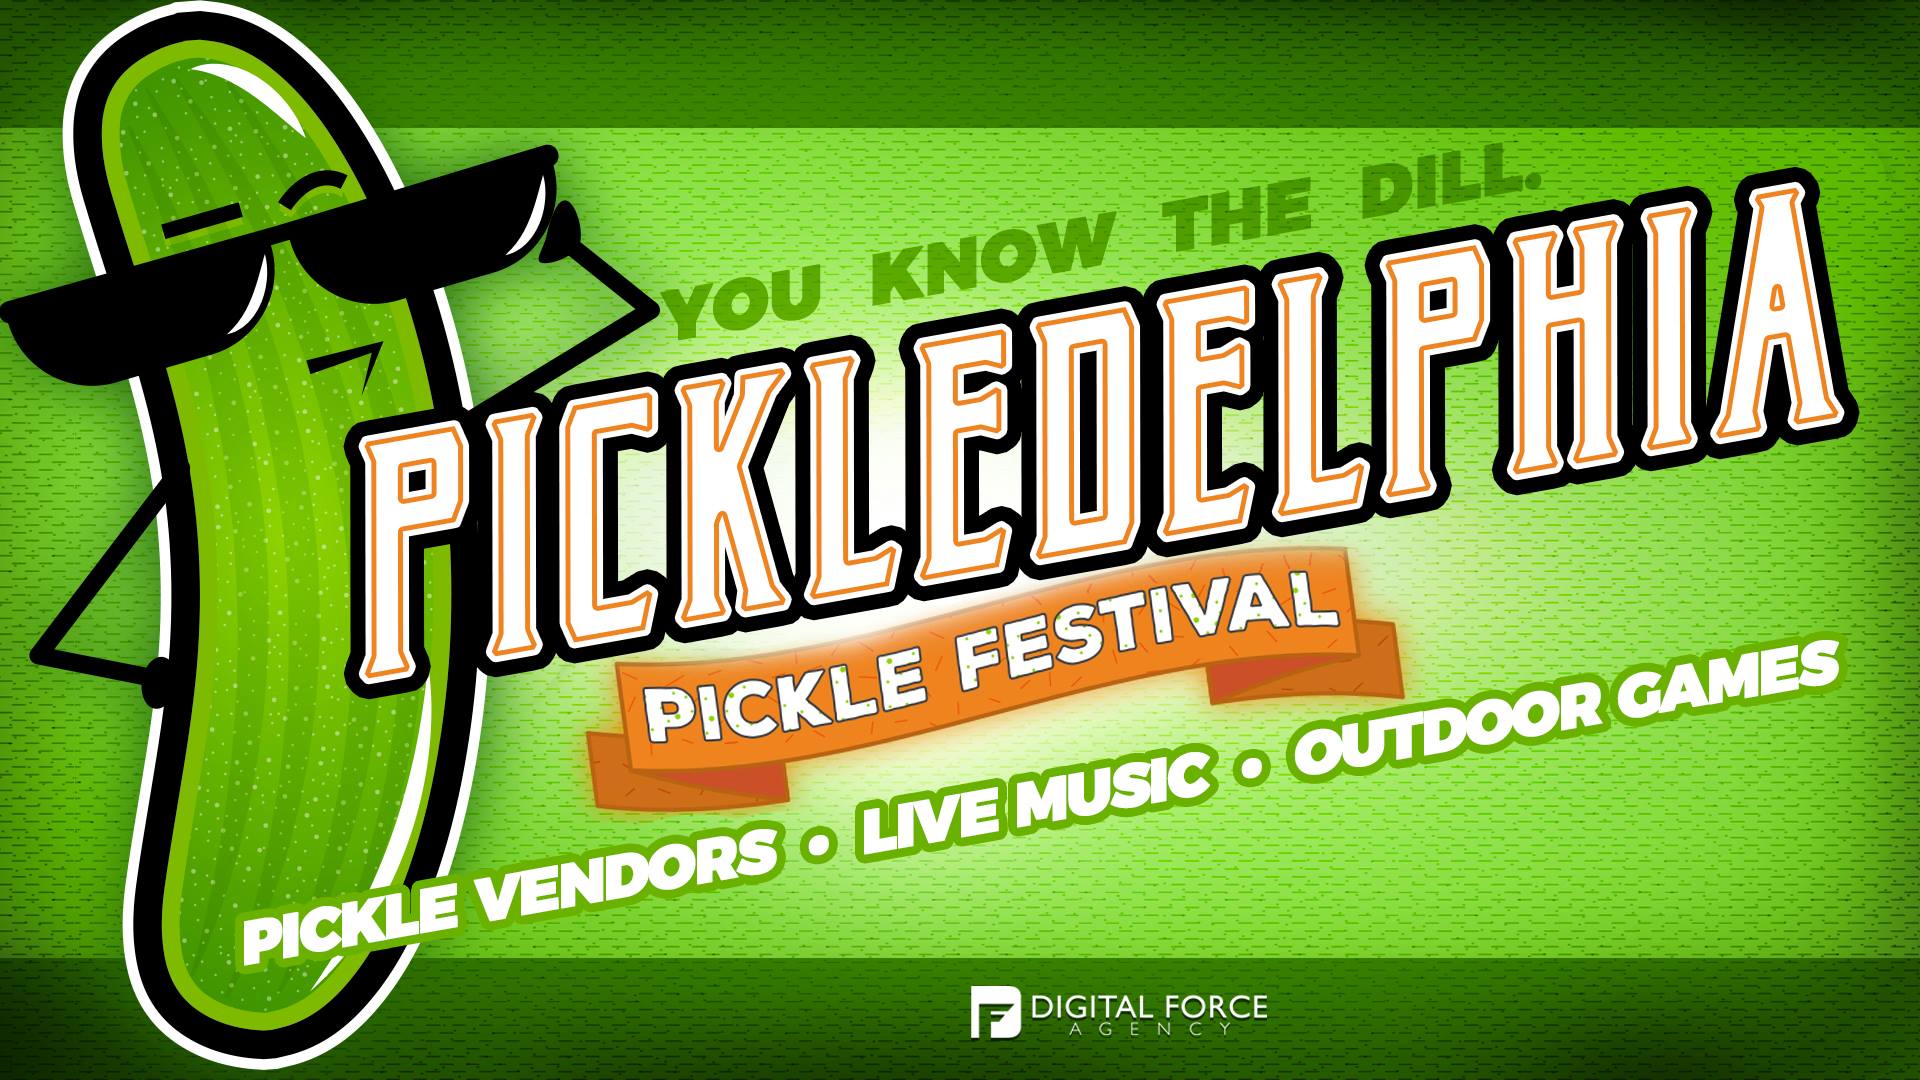 Philadelphia's First Pickle Festival Is Going To Be A Big Dill